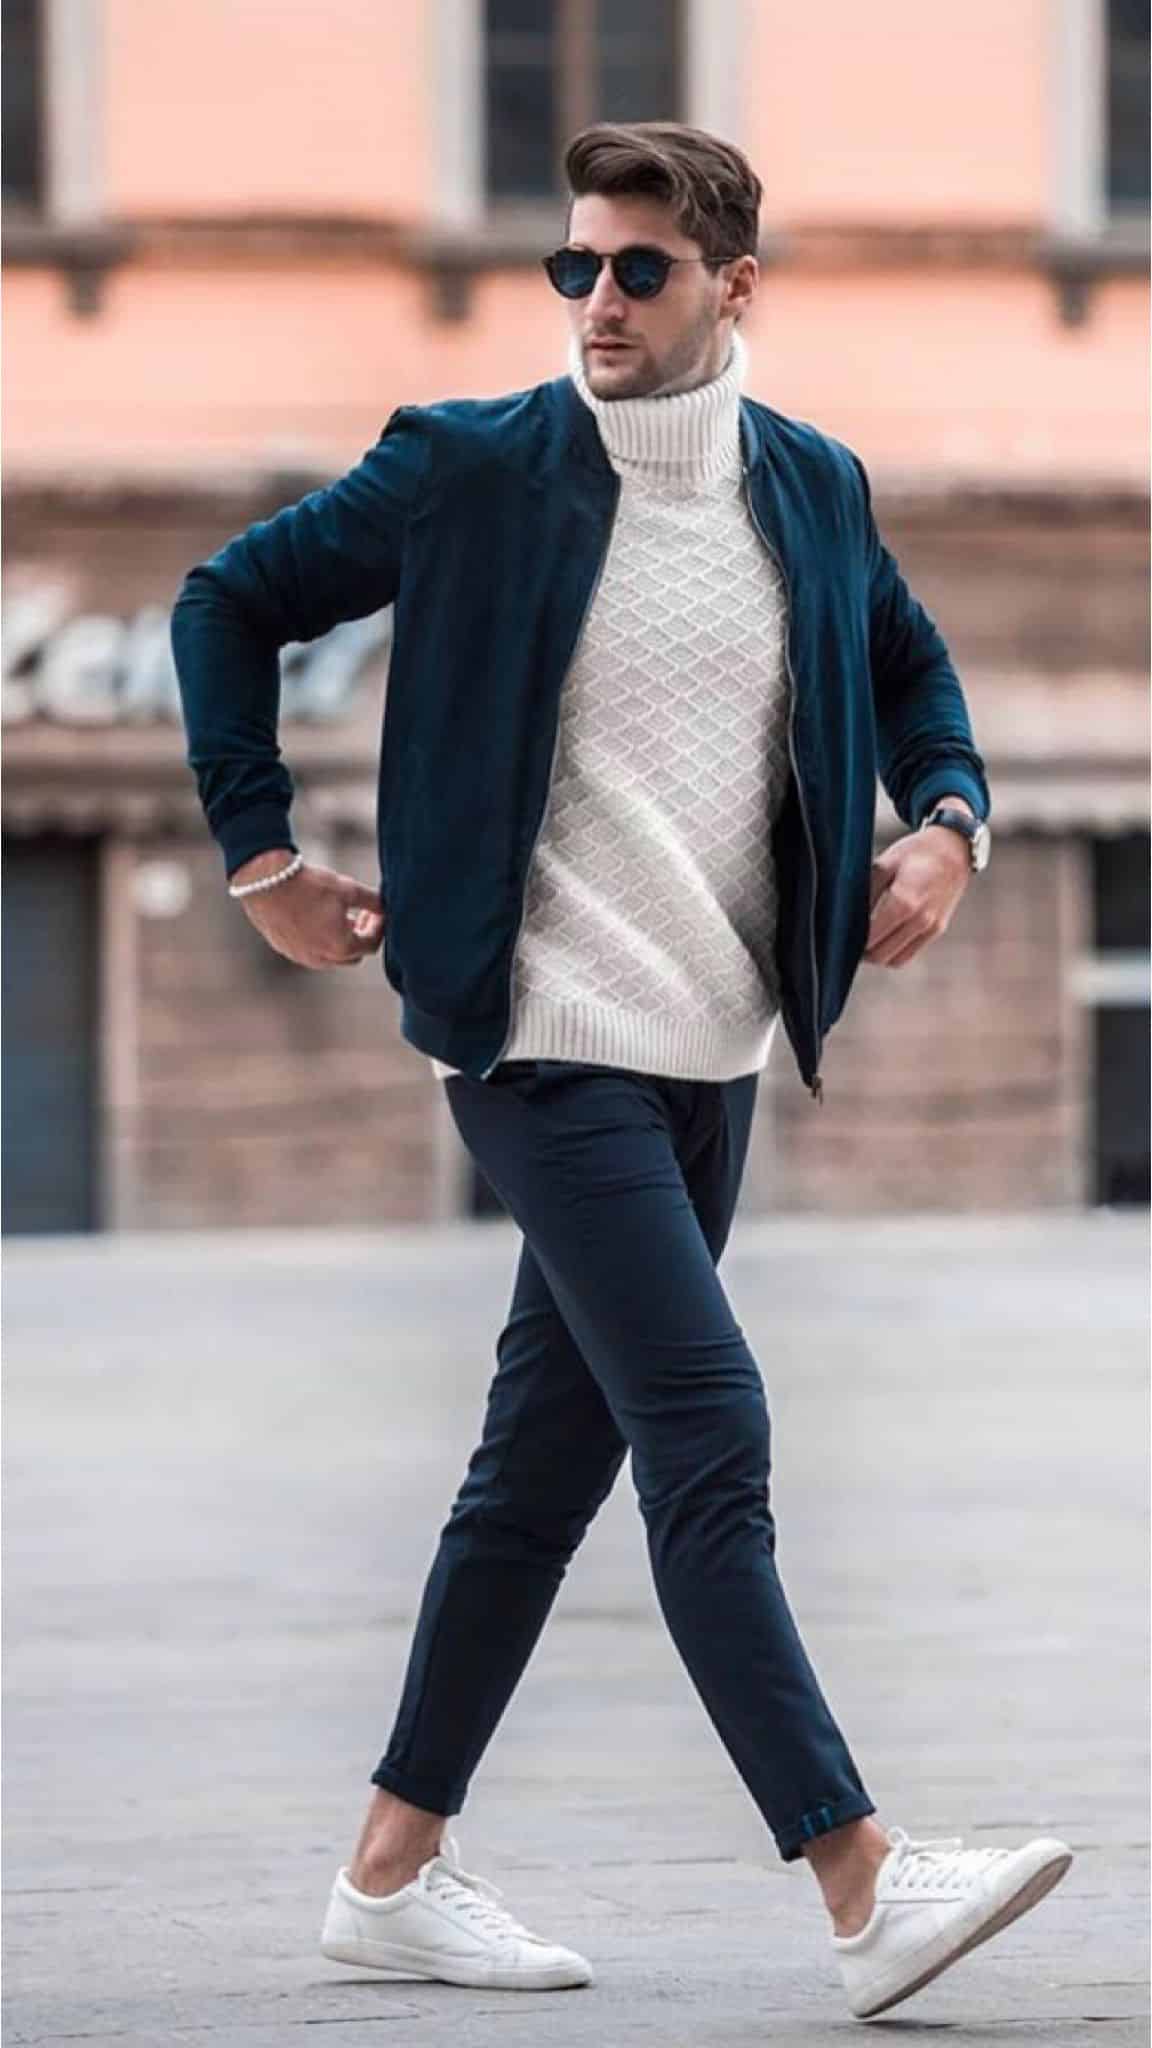 Fall Outfits for Men